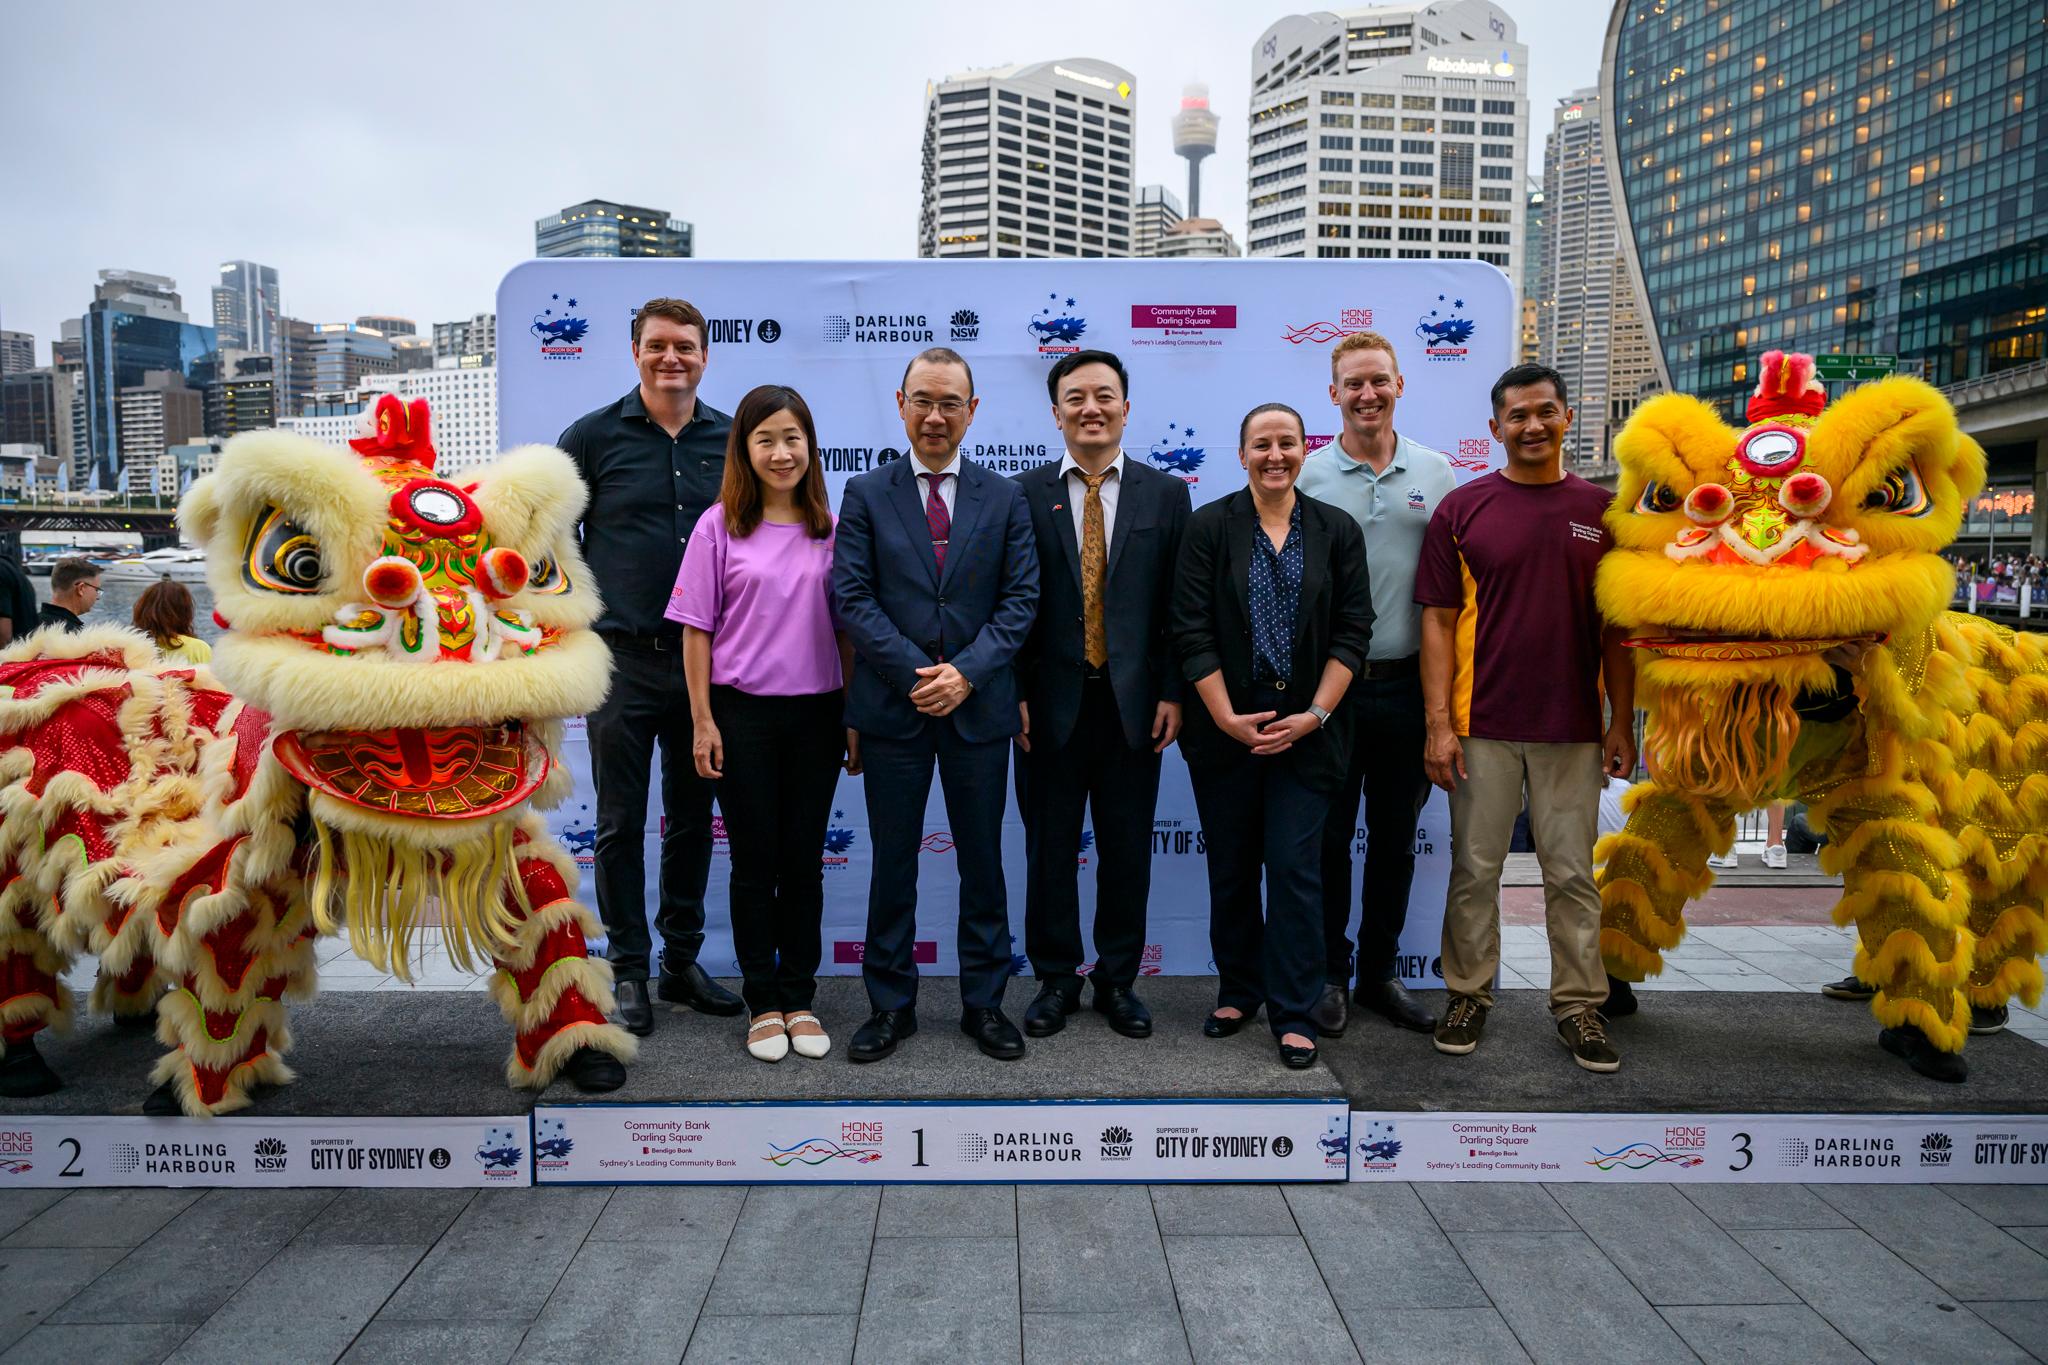 The Hong Kong Economic and Trade Office, Sydney (Sydney ETO) participated in the Sydney Lunar New Year Dragon Boat Festival held in Sydney, Australia, from February 16 to 18. Photo shows the Acting Consul General of the People's Republic of China in Sydney, Mr Yu Jie (centre); the Director of the Sydney ETO, Miss Trista Lim (second left); the Deputy Lord Mayor of the City of Sydney, Mr Robert Kok (third left); the Chief Executive Officer of Dragon Boats New South Wales, Mr David Krantz (second right), and other guests at the award presentation ceremony on February 16.



